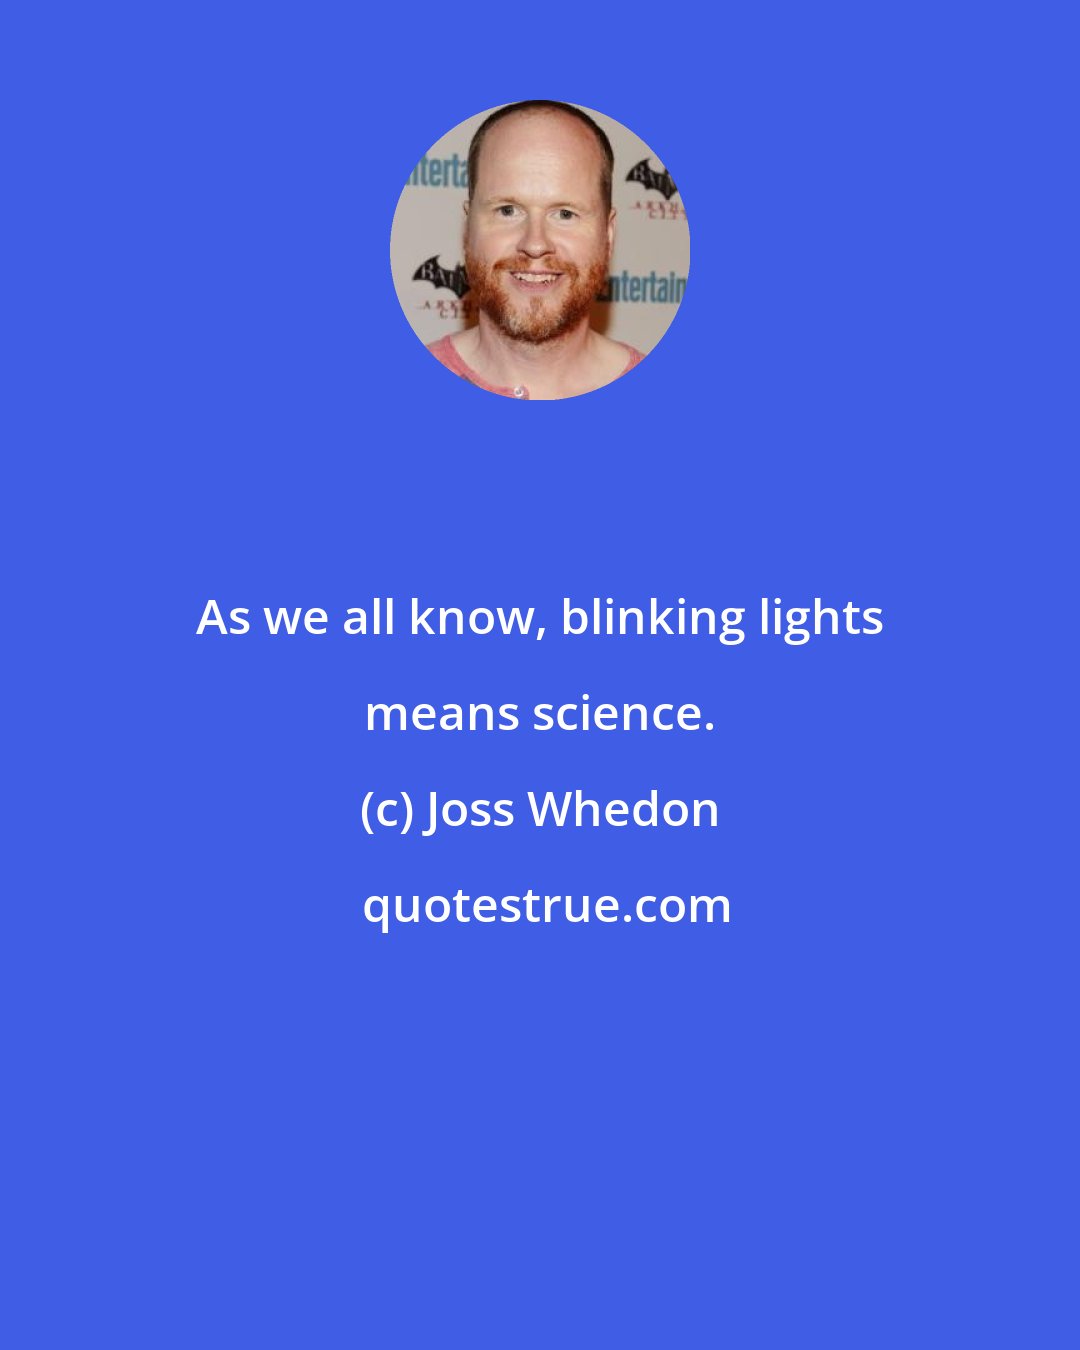 Joss Whedon: As we all know, blinking lights means science.